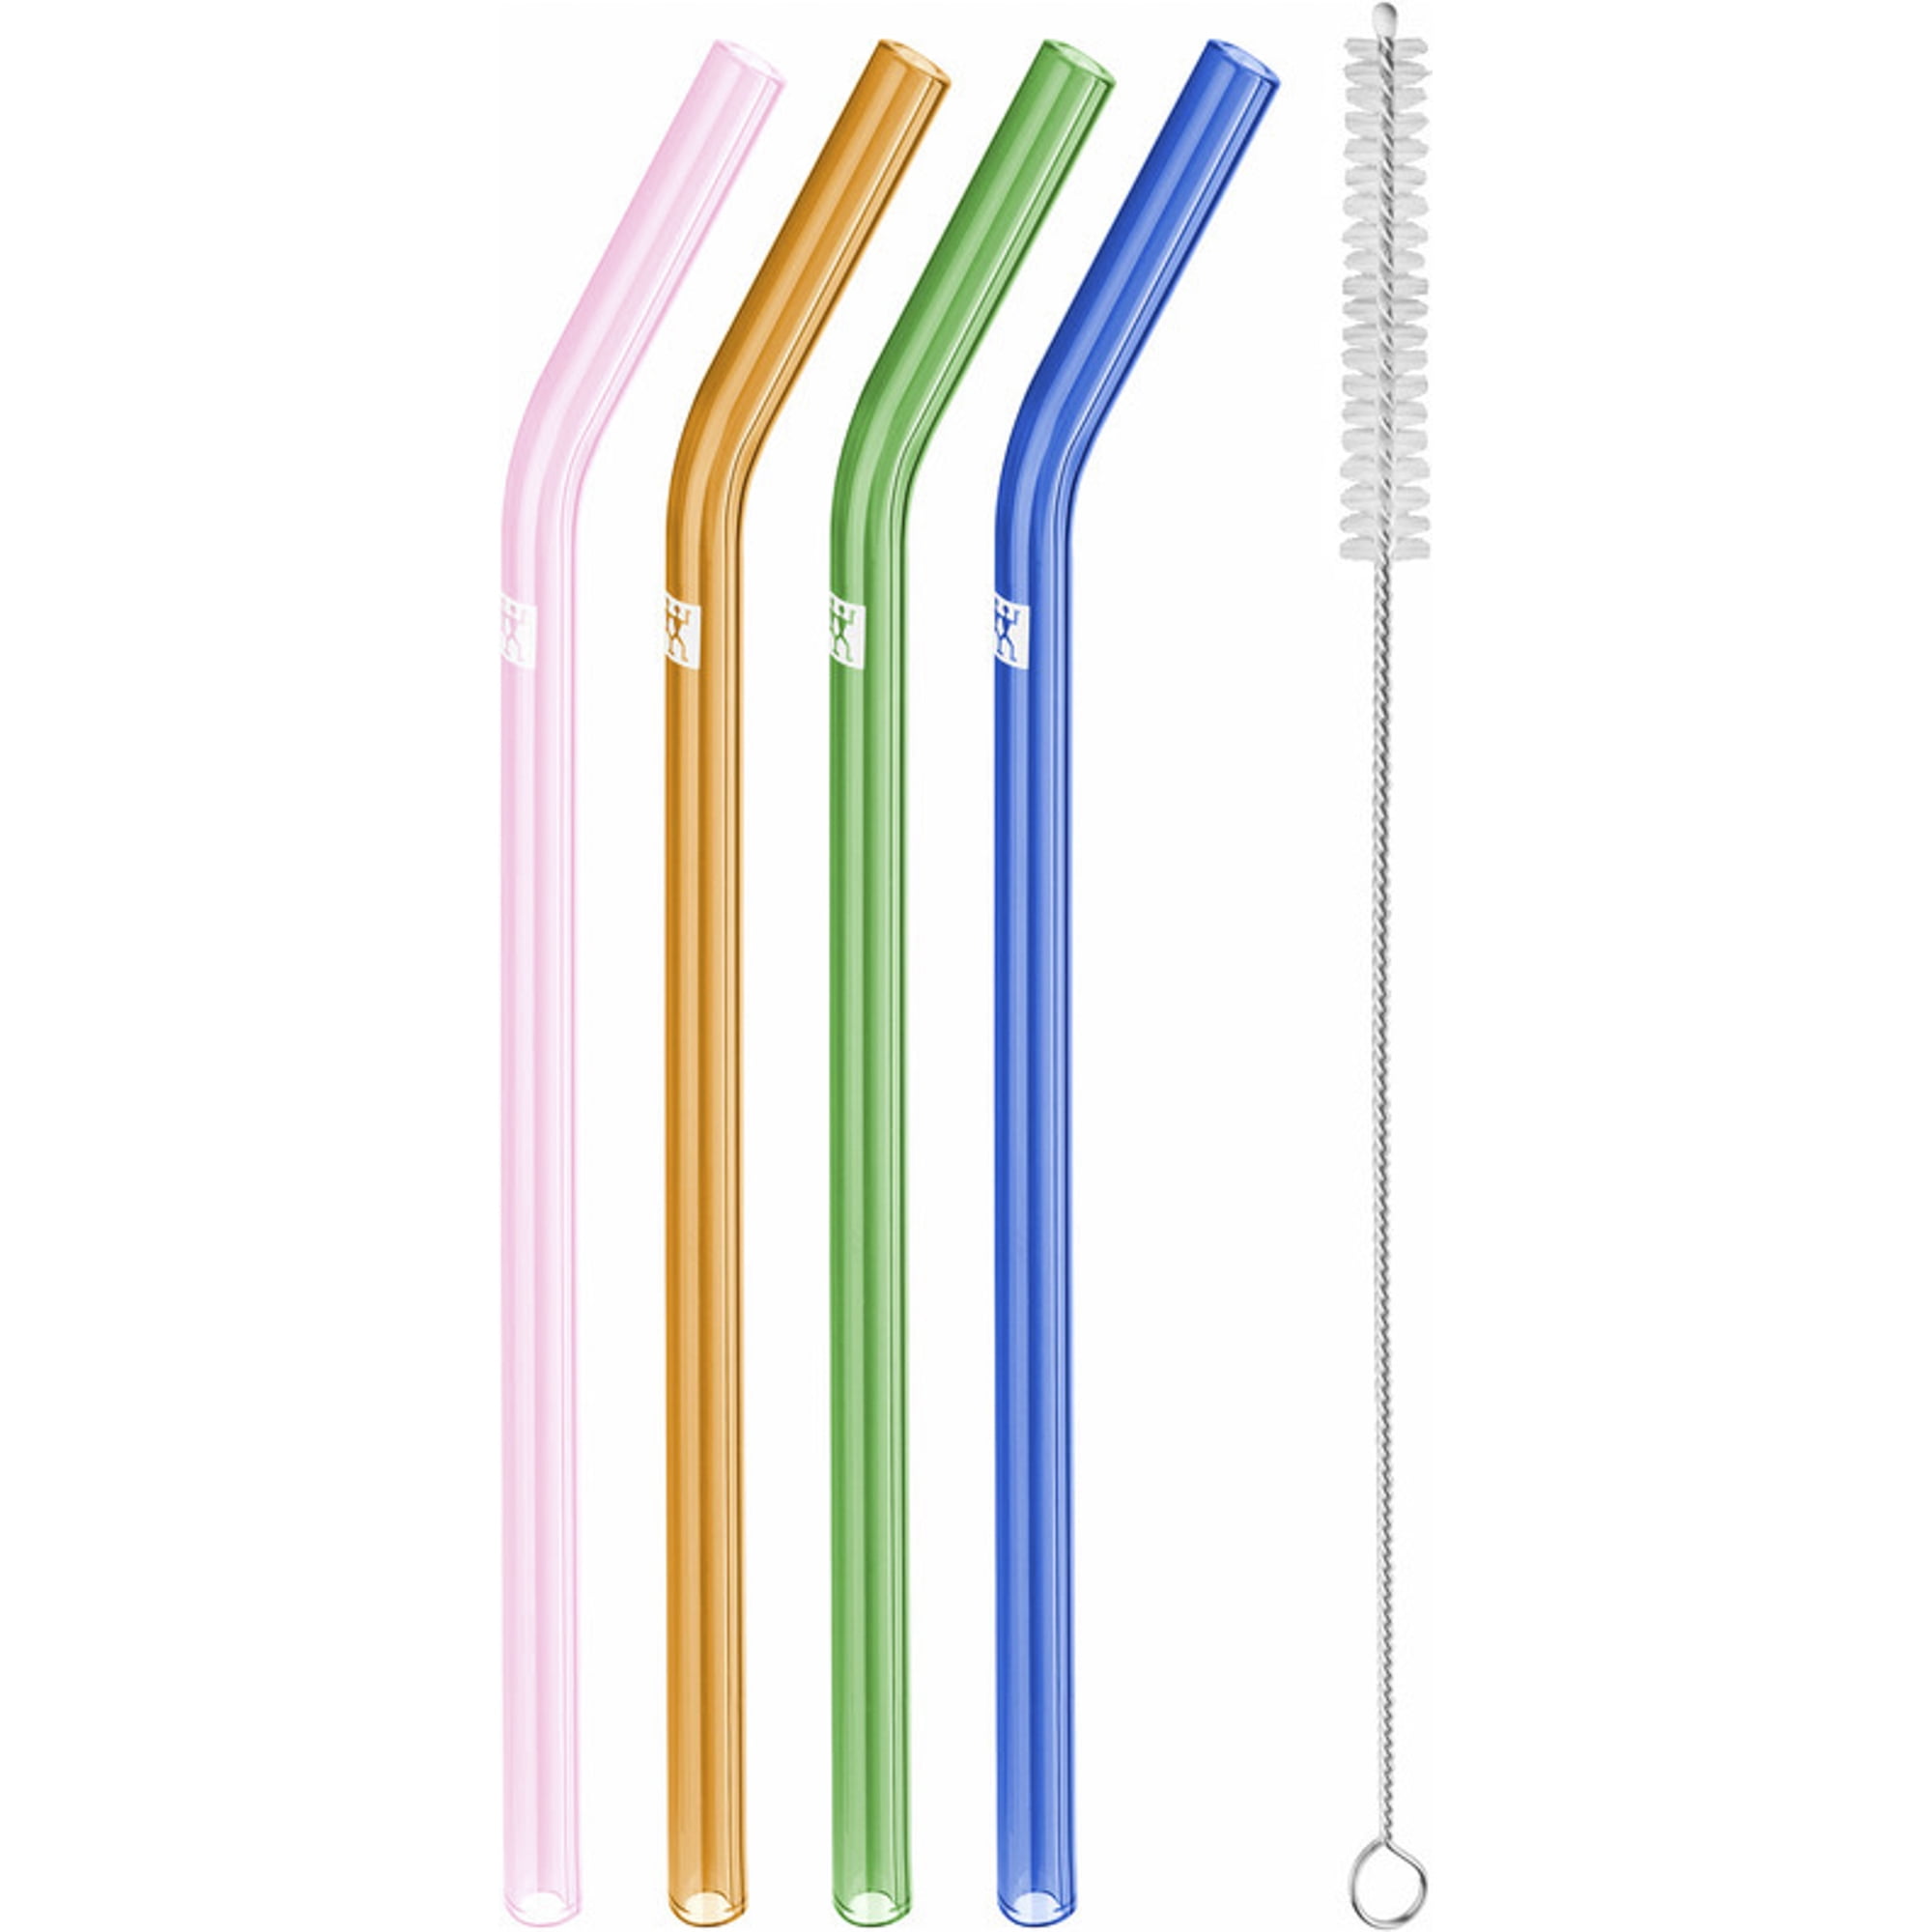 ZWILLING Sorrento 5-pc Bent Glass Straw Set - Multi Color